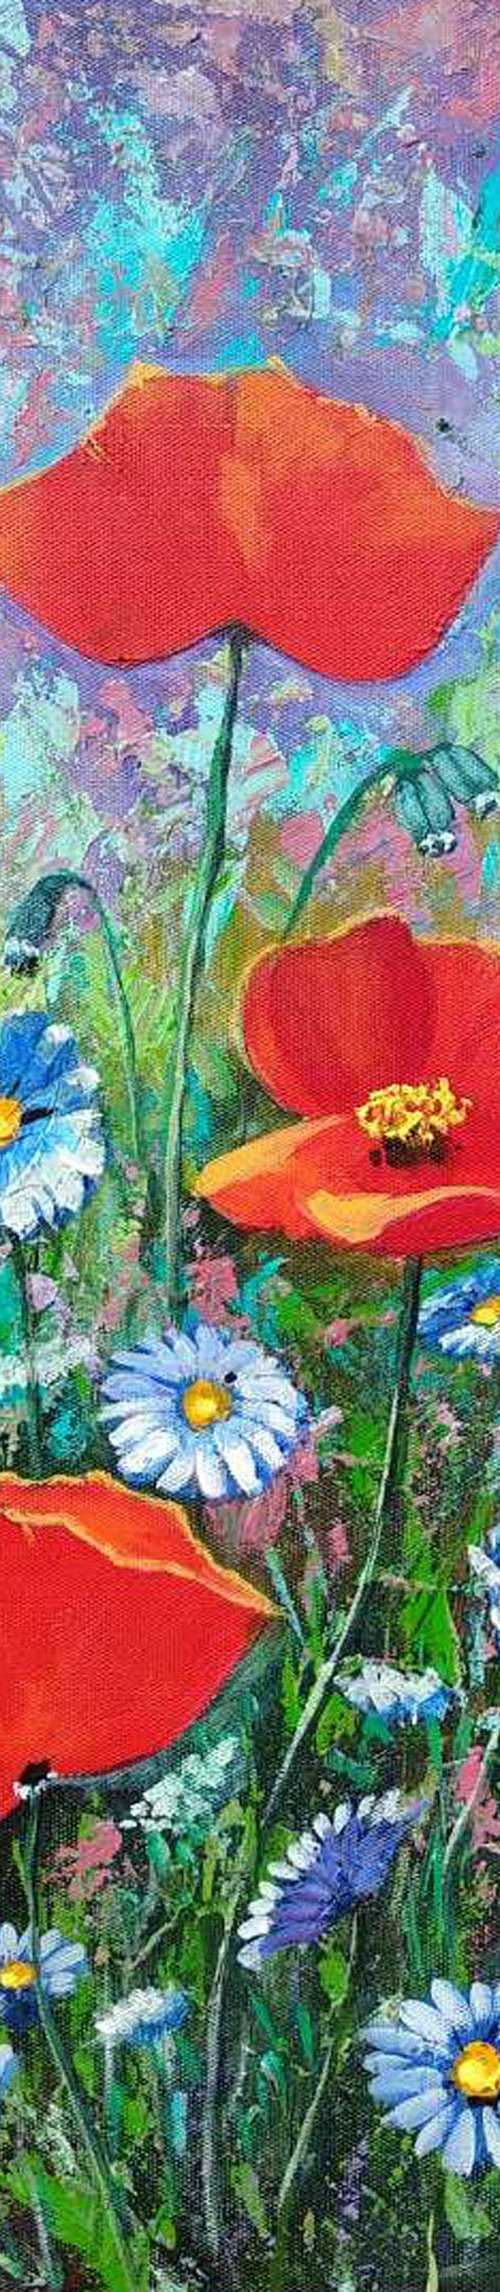 Bouquet of poppies and daisies by Ivan Todorov